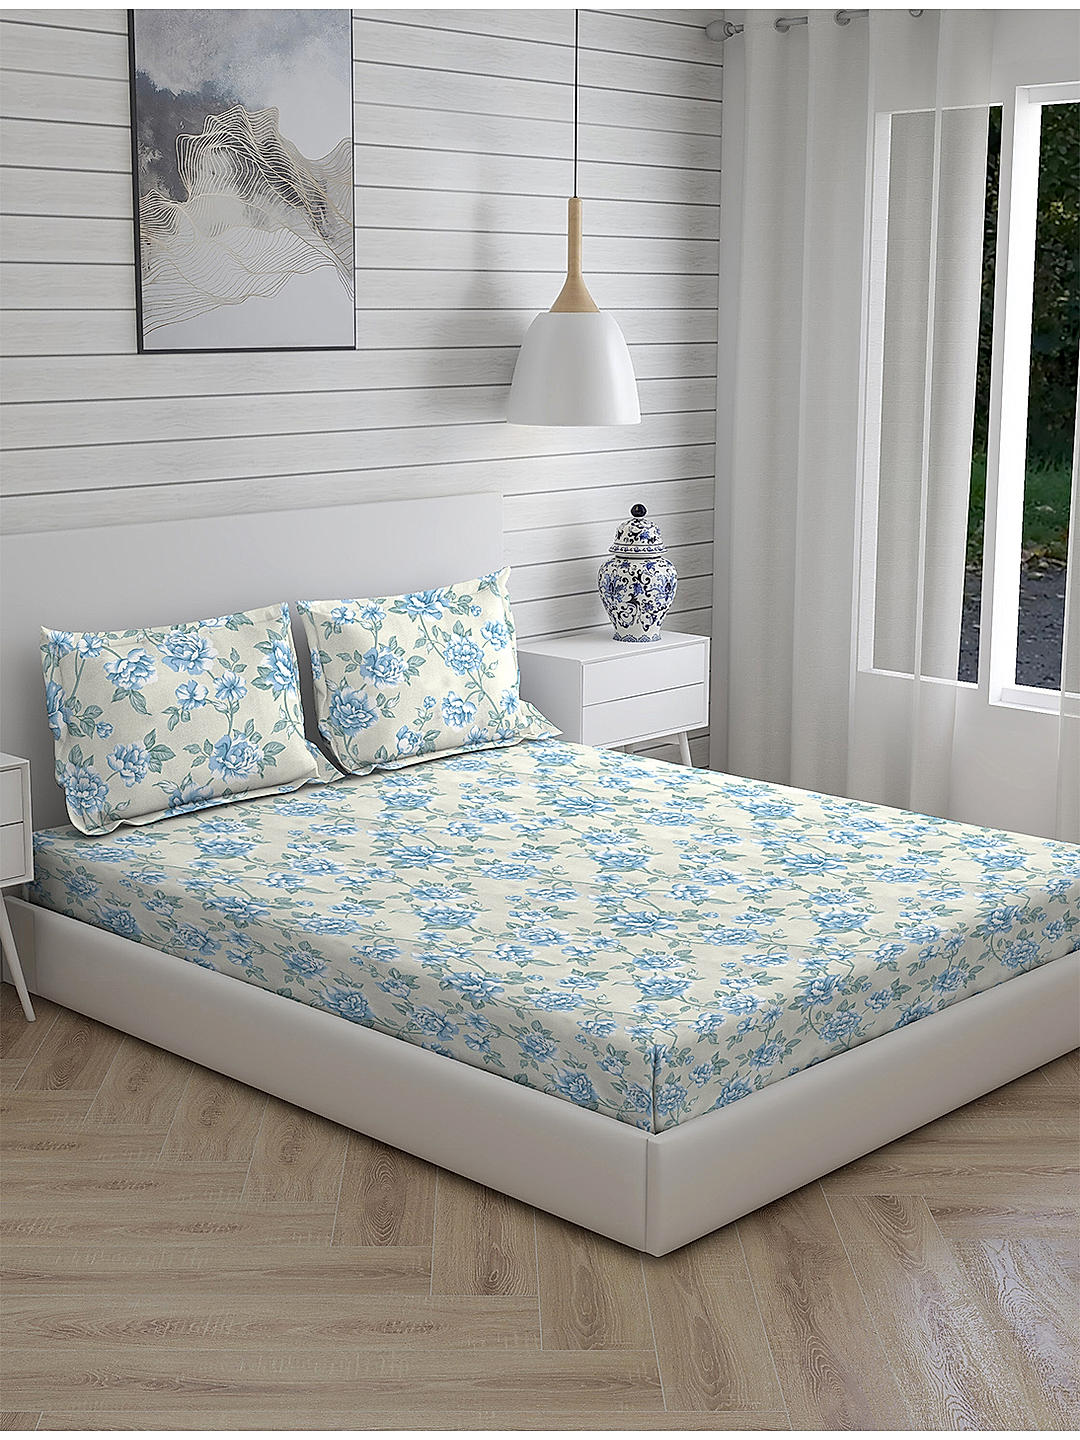 Signature Sateen 300 TC 100% cotton Ultra Fine Light Blue Colored Floral Print Fitted Bed Sheet Set